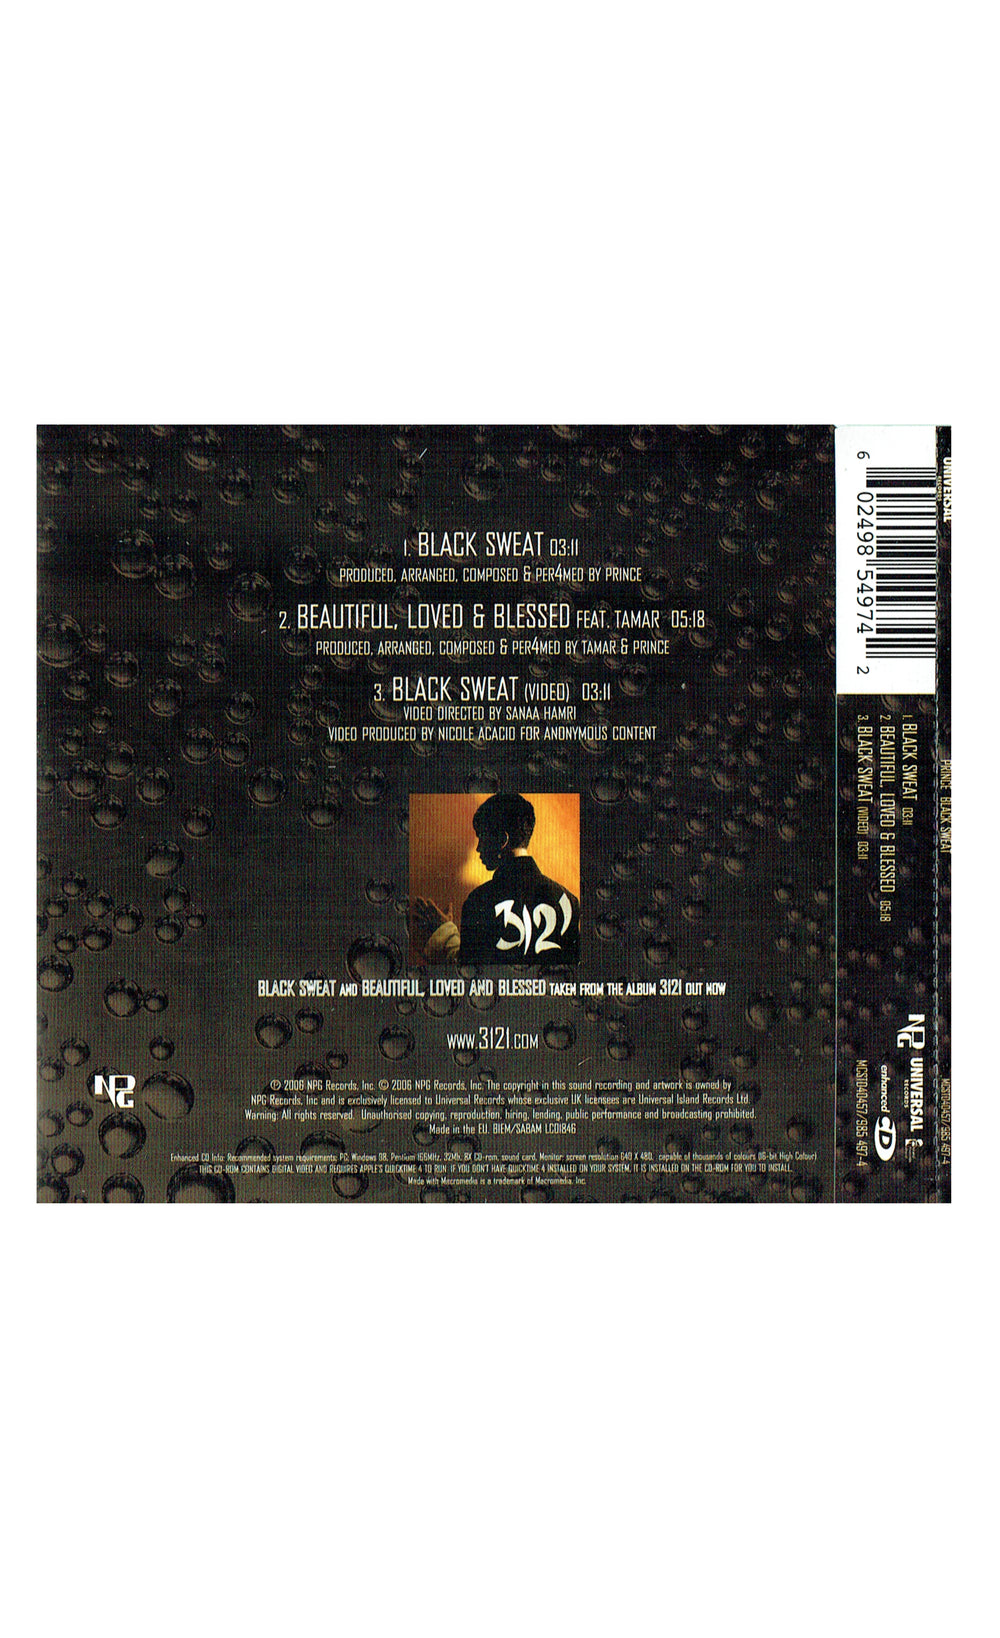 Prince – Black Sweat Enhanced Video 2006 Picture CD Single 3 Tracks Preowned: 2006